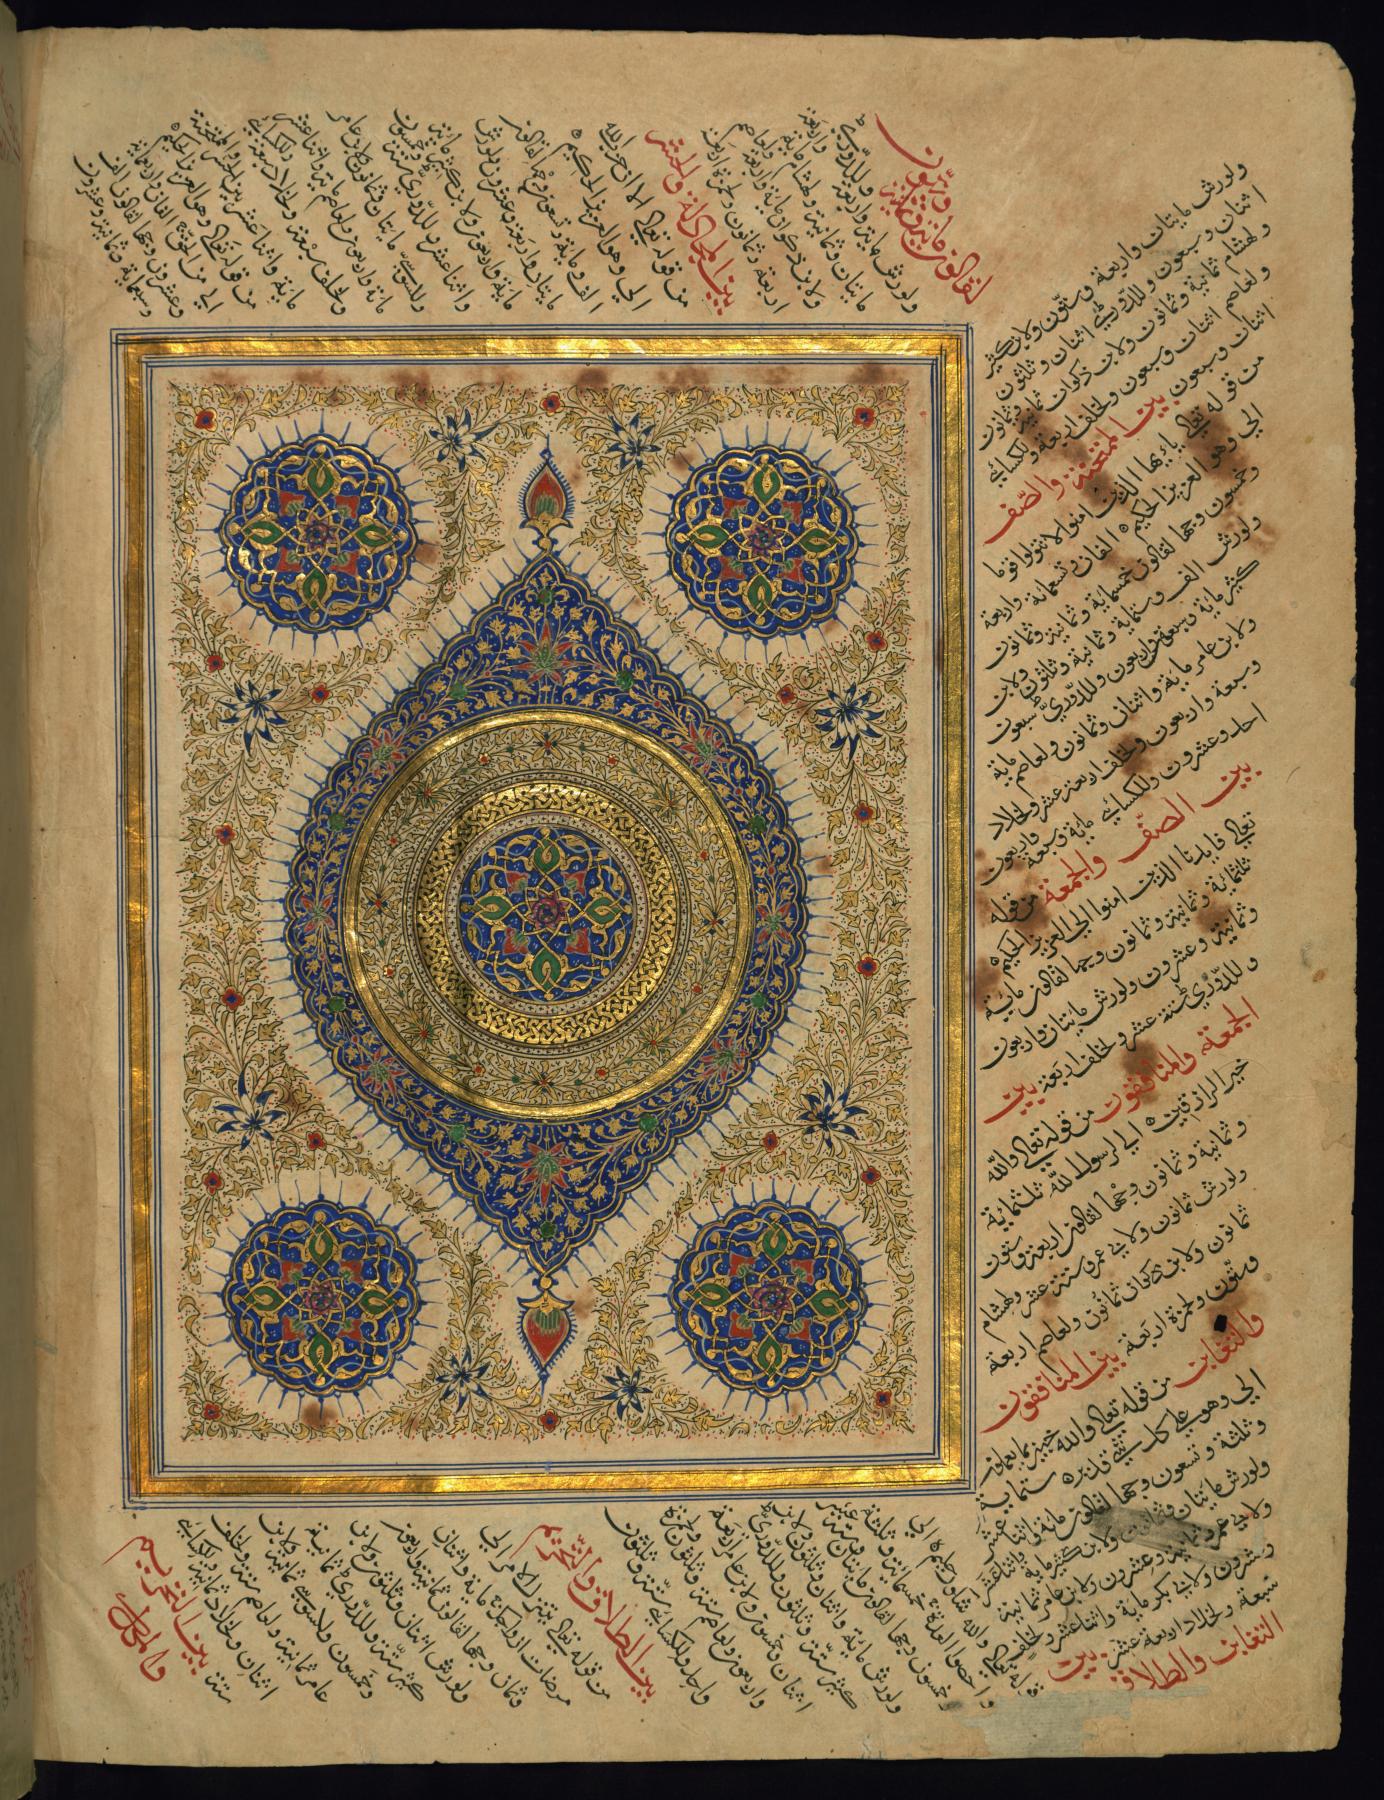 Illuminated Timurid copy of the Qur'an, India